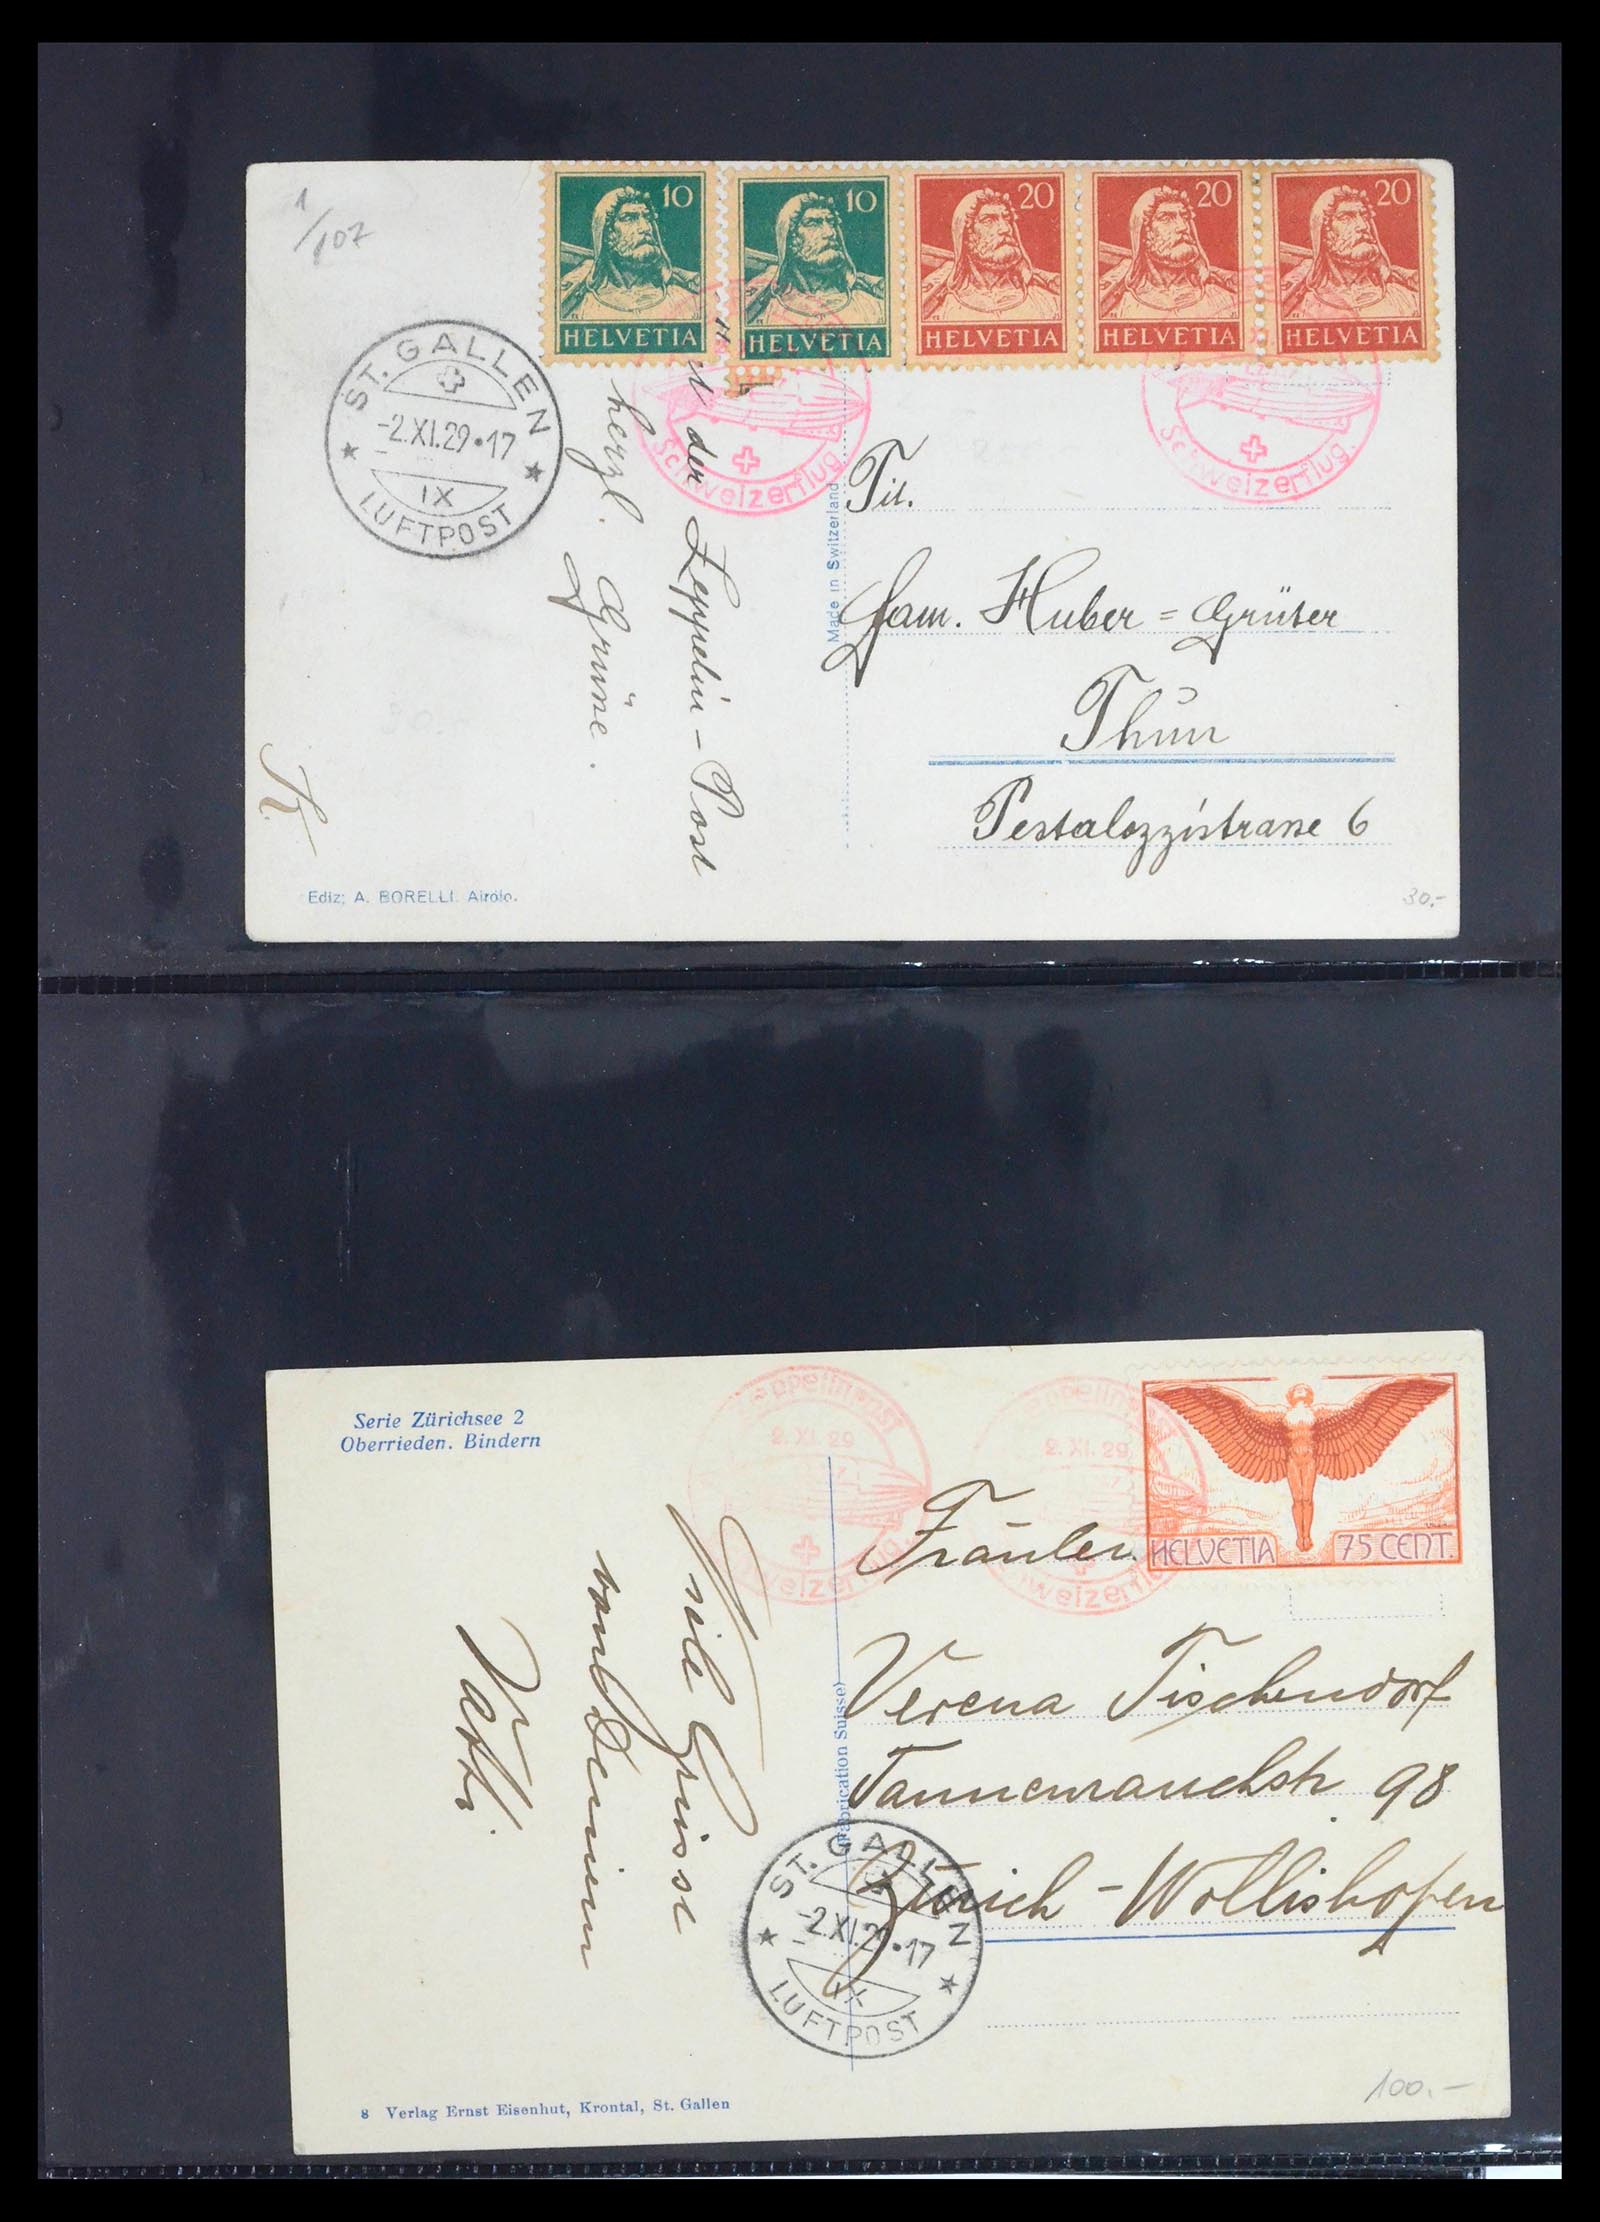 39533 0007 - Stamp collection 39533 Zwitserland airmail covers 1925-1960.